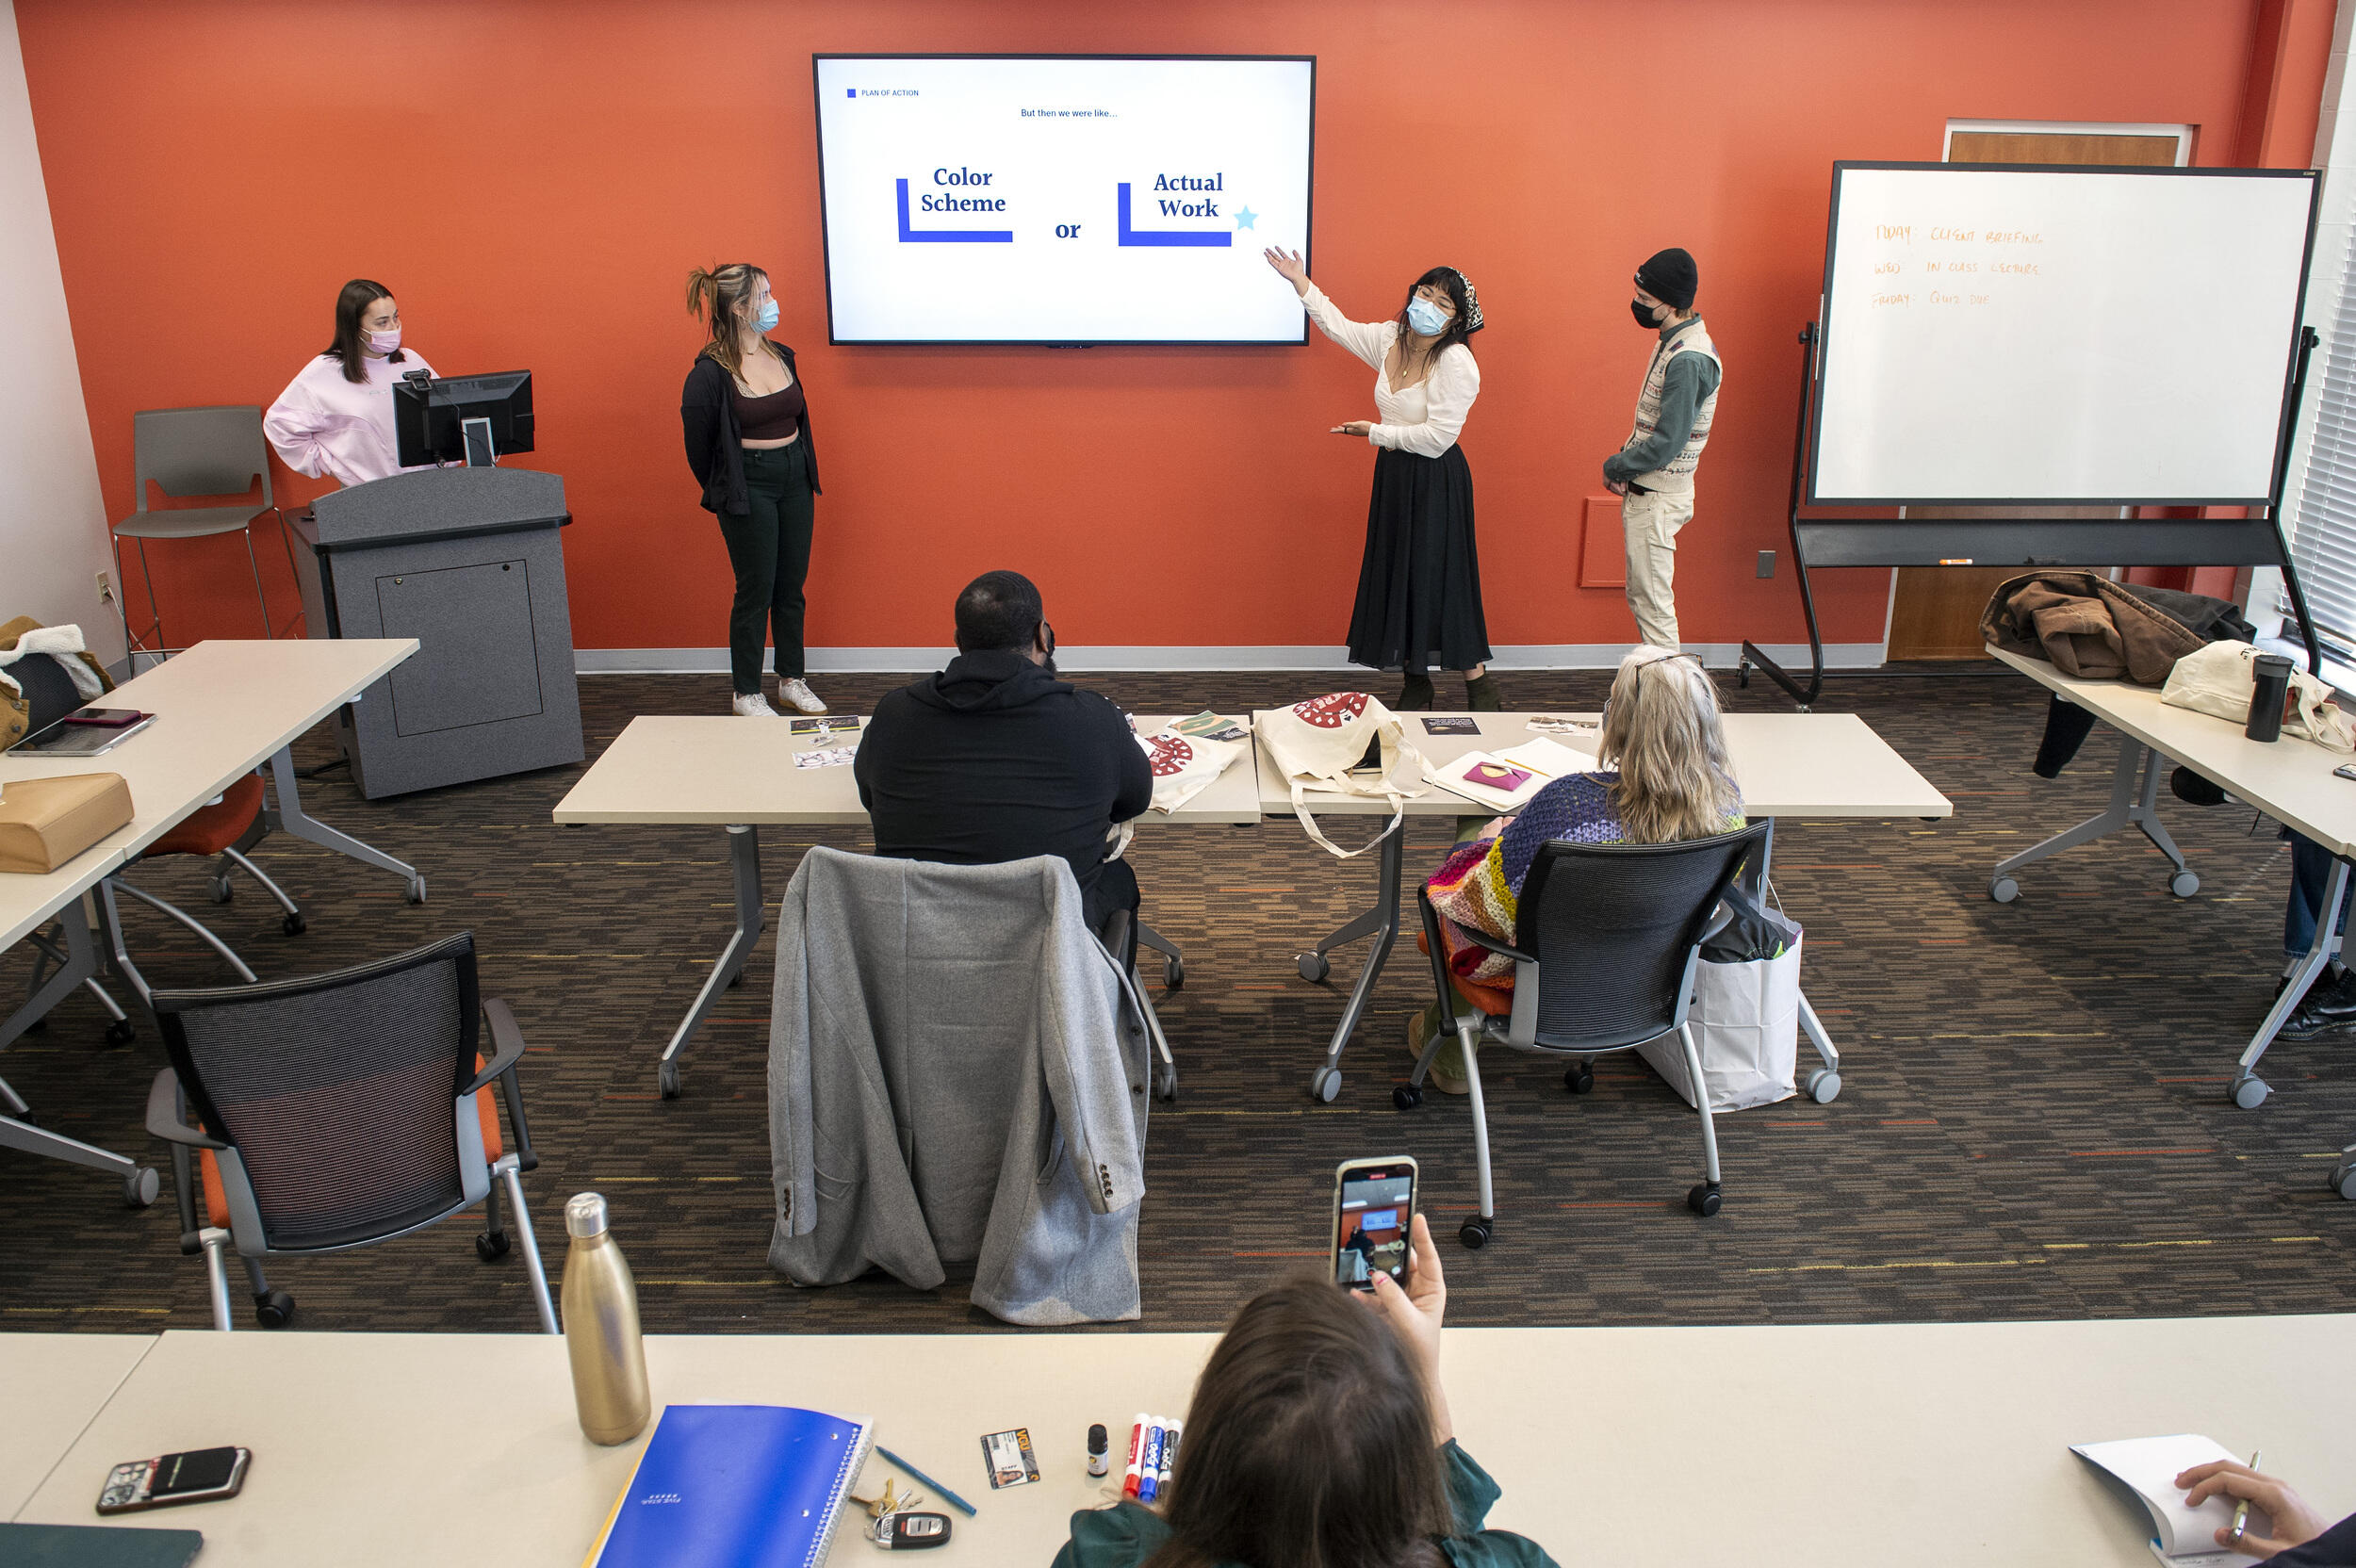 Students giving a presentation at the front of a room